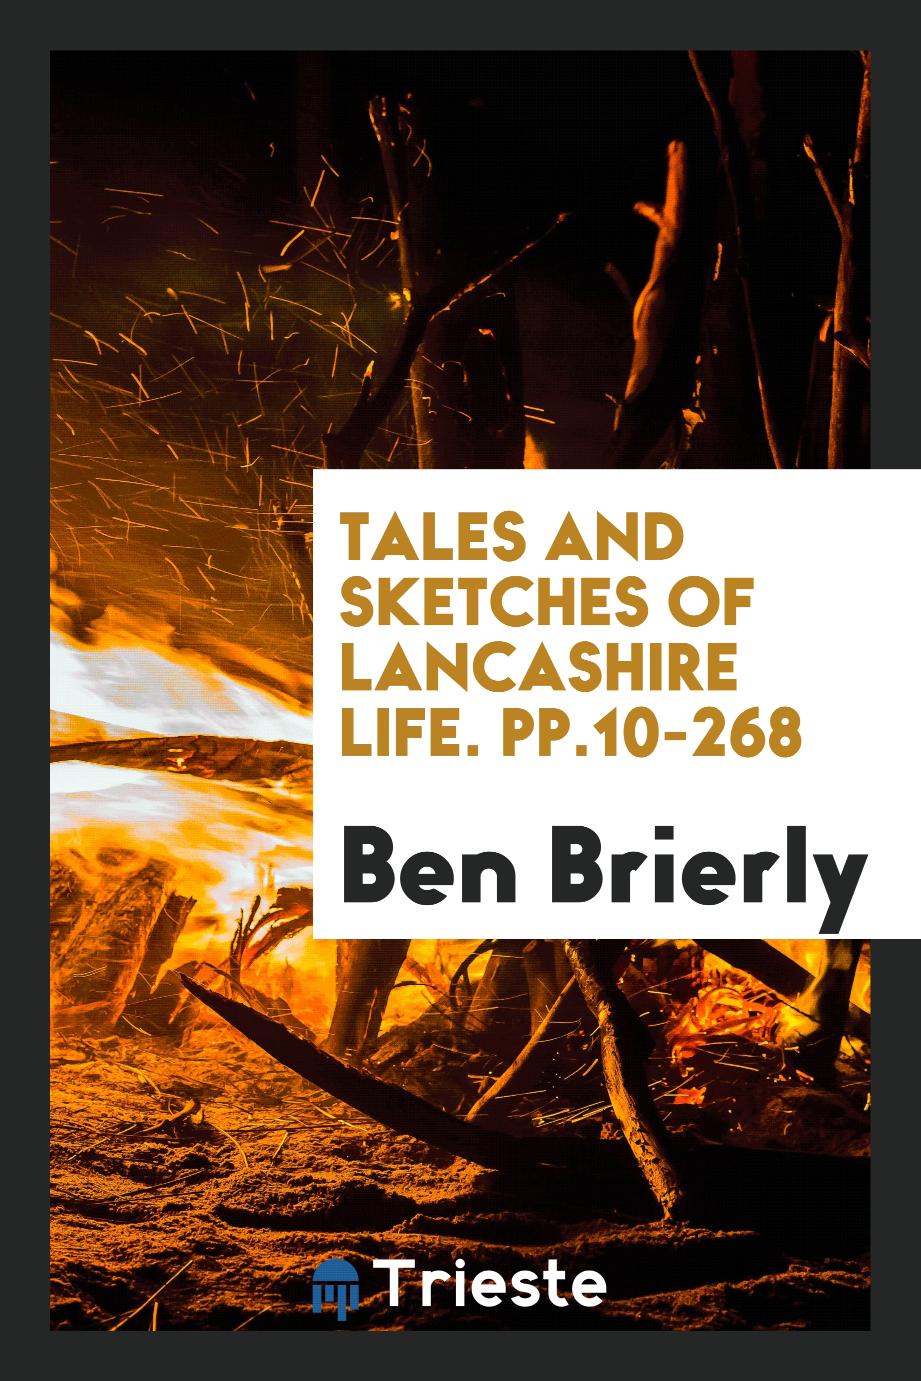 Tales and Sketches of Lancashire Life. pp.10-268